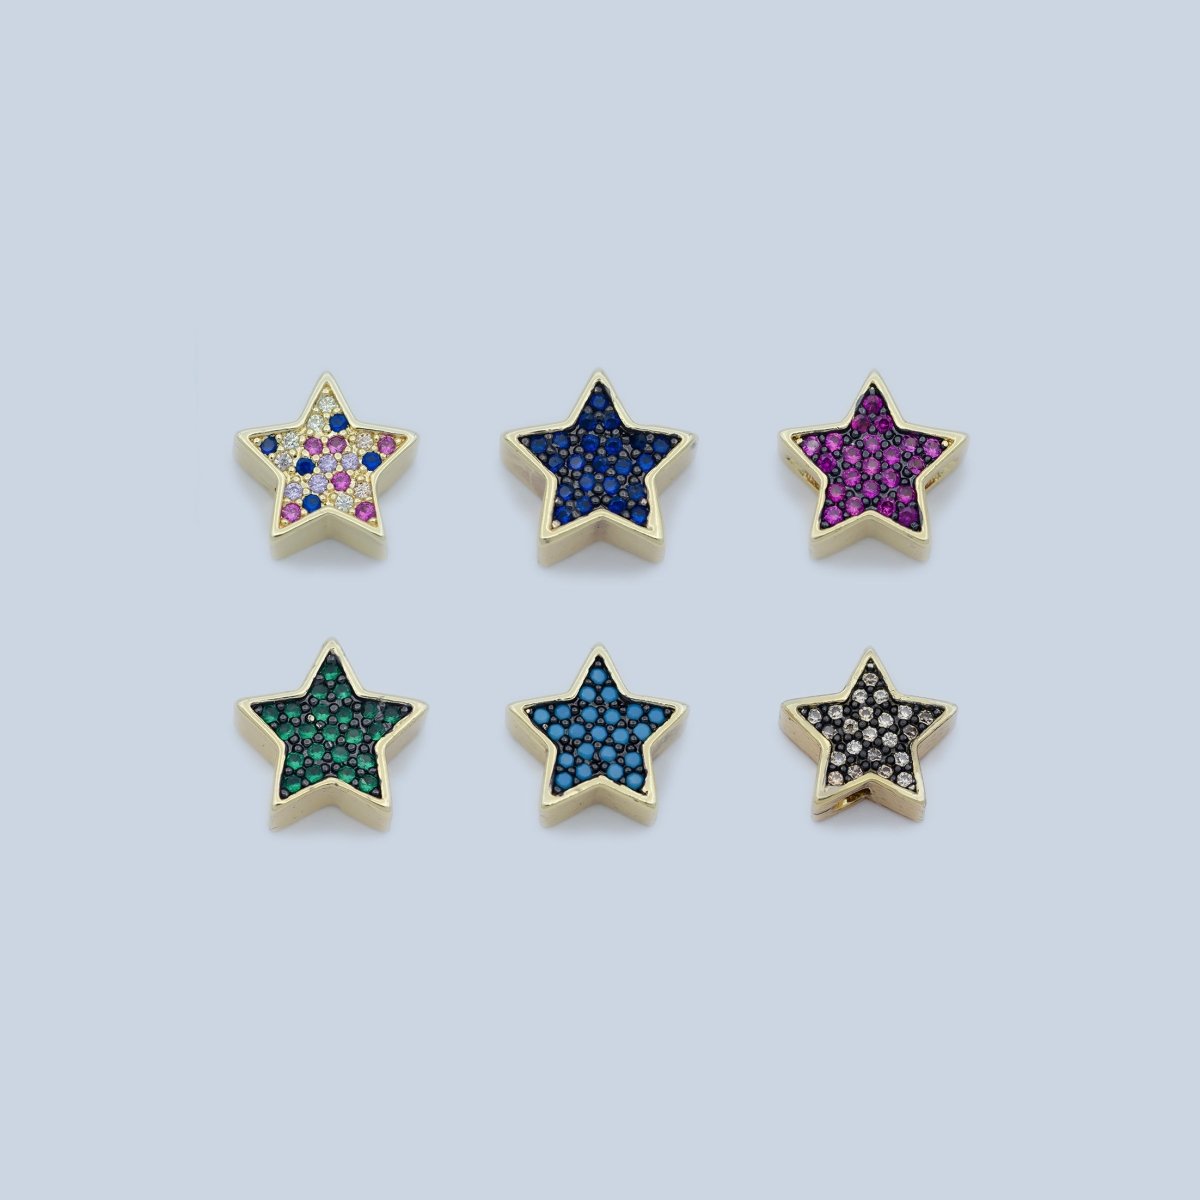 14k Gold Filled Star Beads, Star Spacer Beads, Gold Bracelet Charms Rose Gold Silver Love Jewelry Supplies Component findings 10MM B-558 to B-563 - DLUXCA